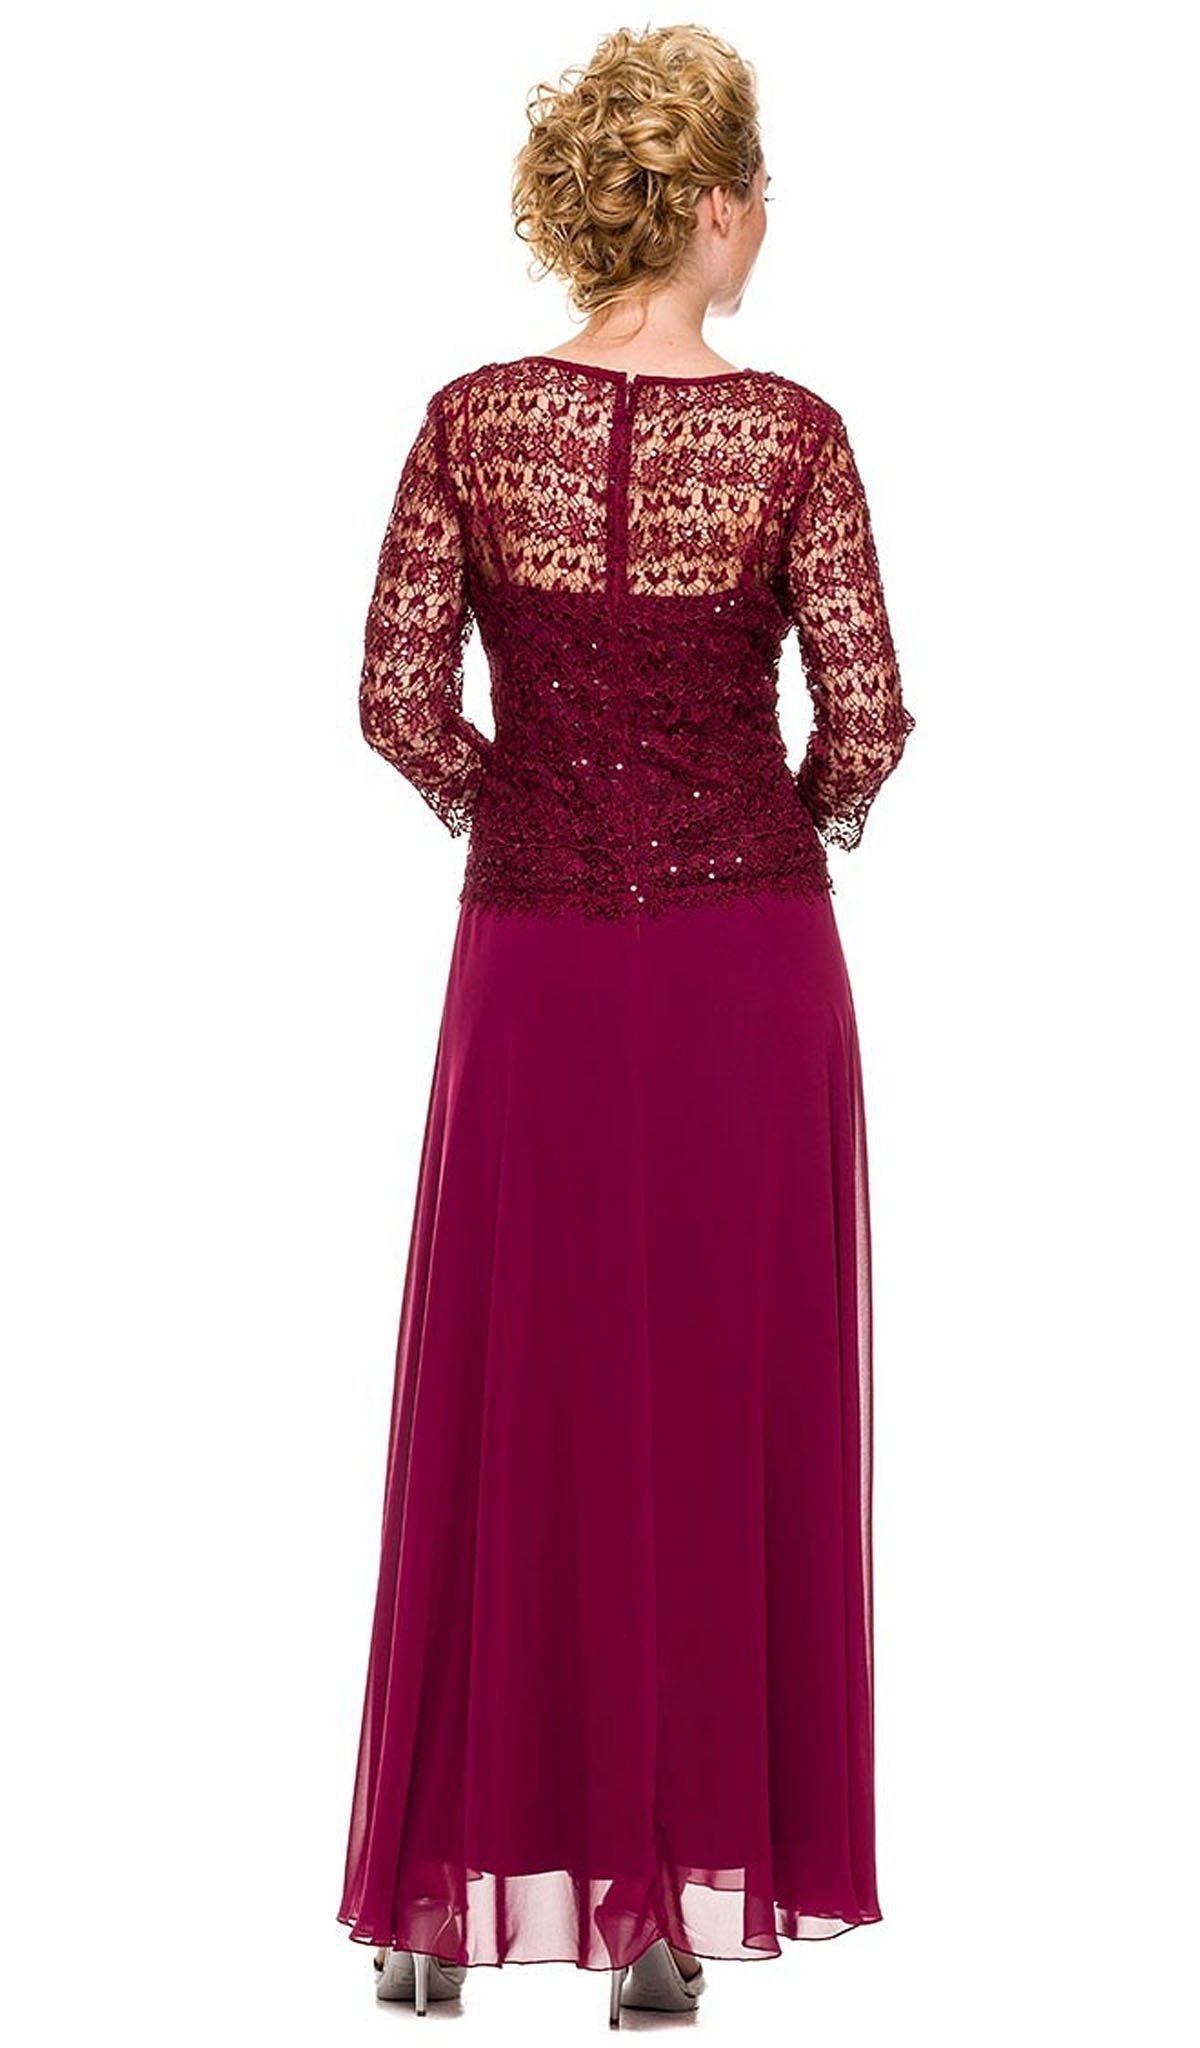 Nox Anabel - 5083 Quarter Sleeves Lace Overlay Top Long Formal Dress Special Occasion Dress